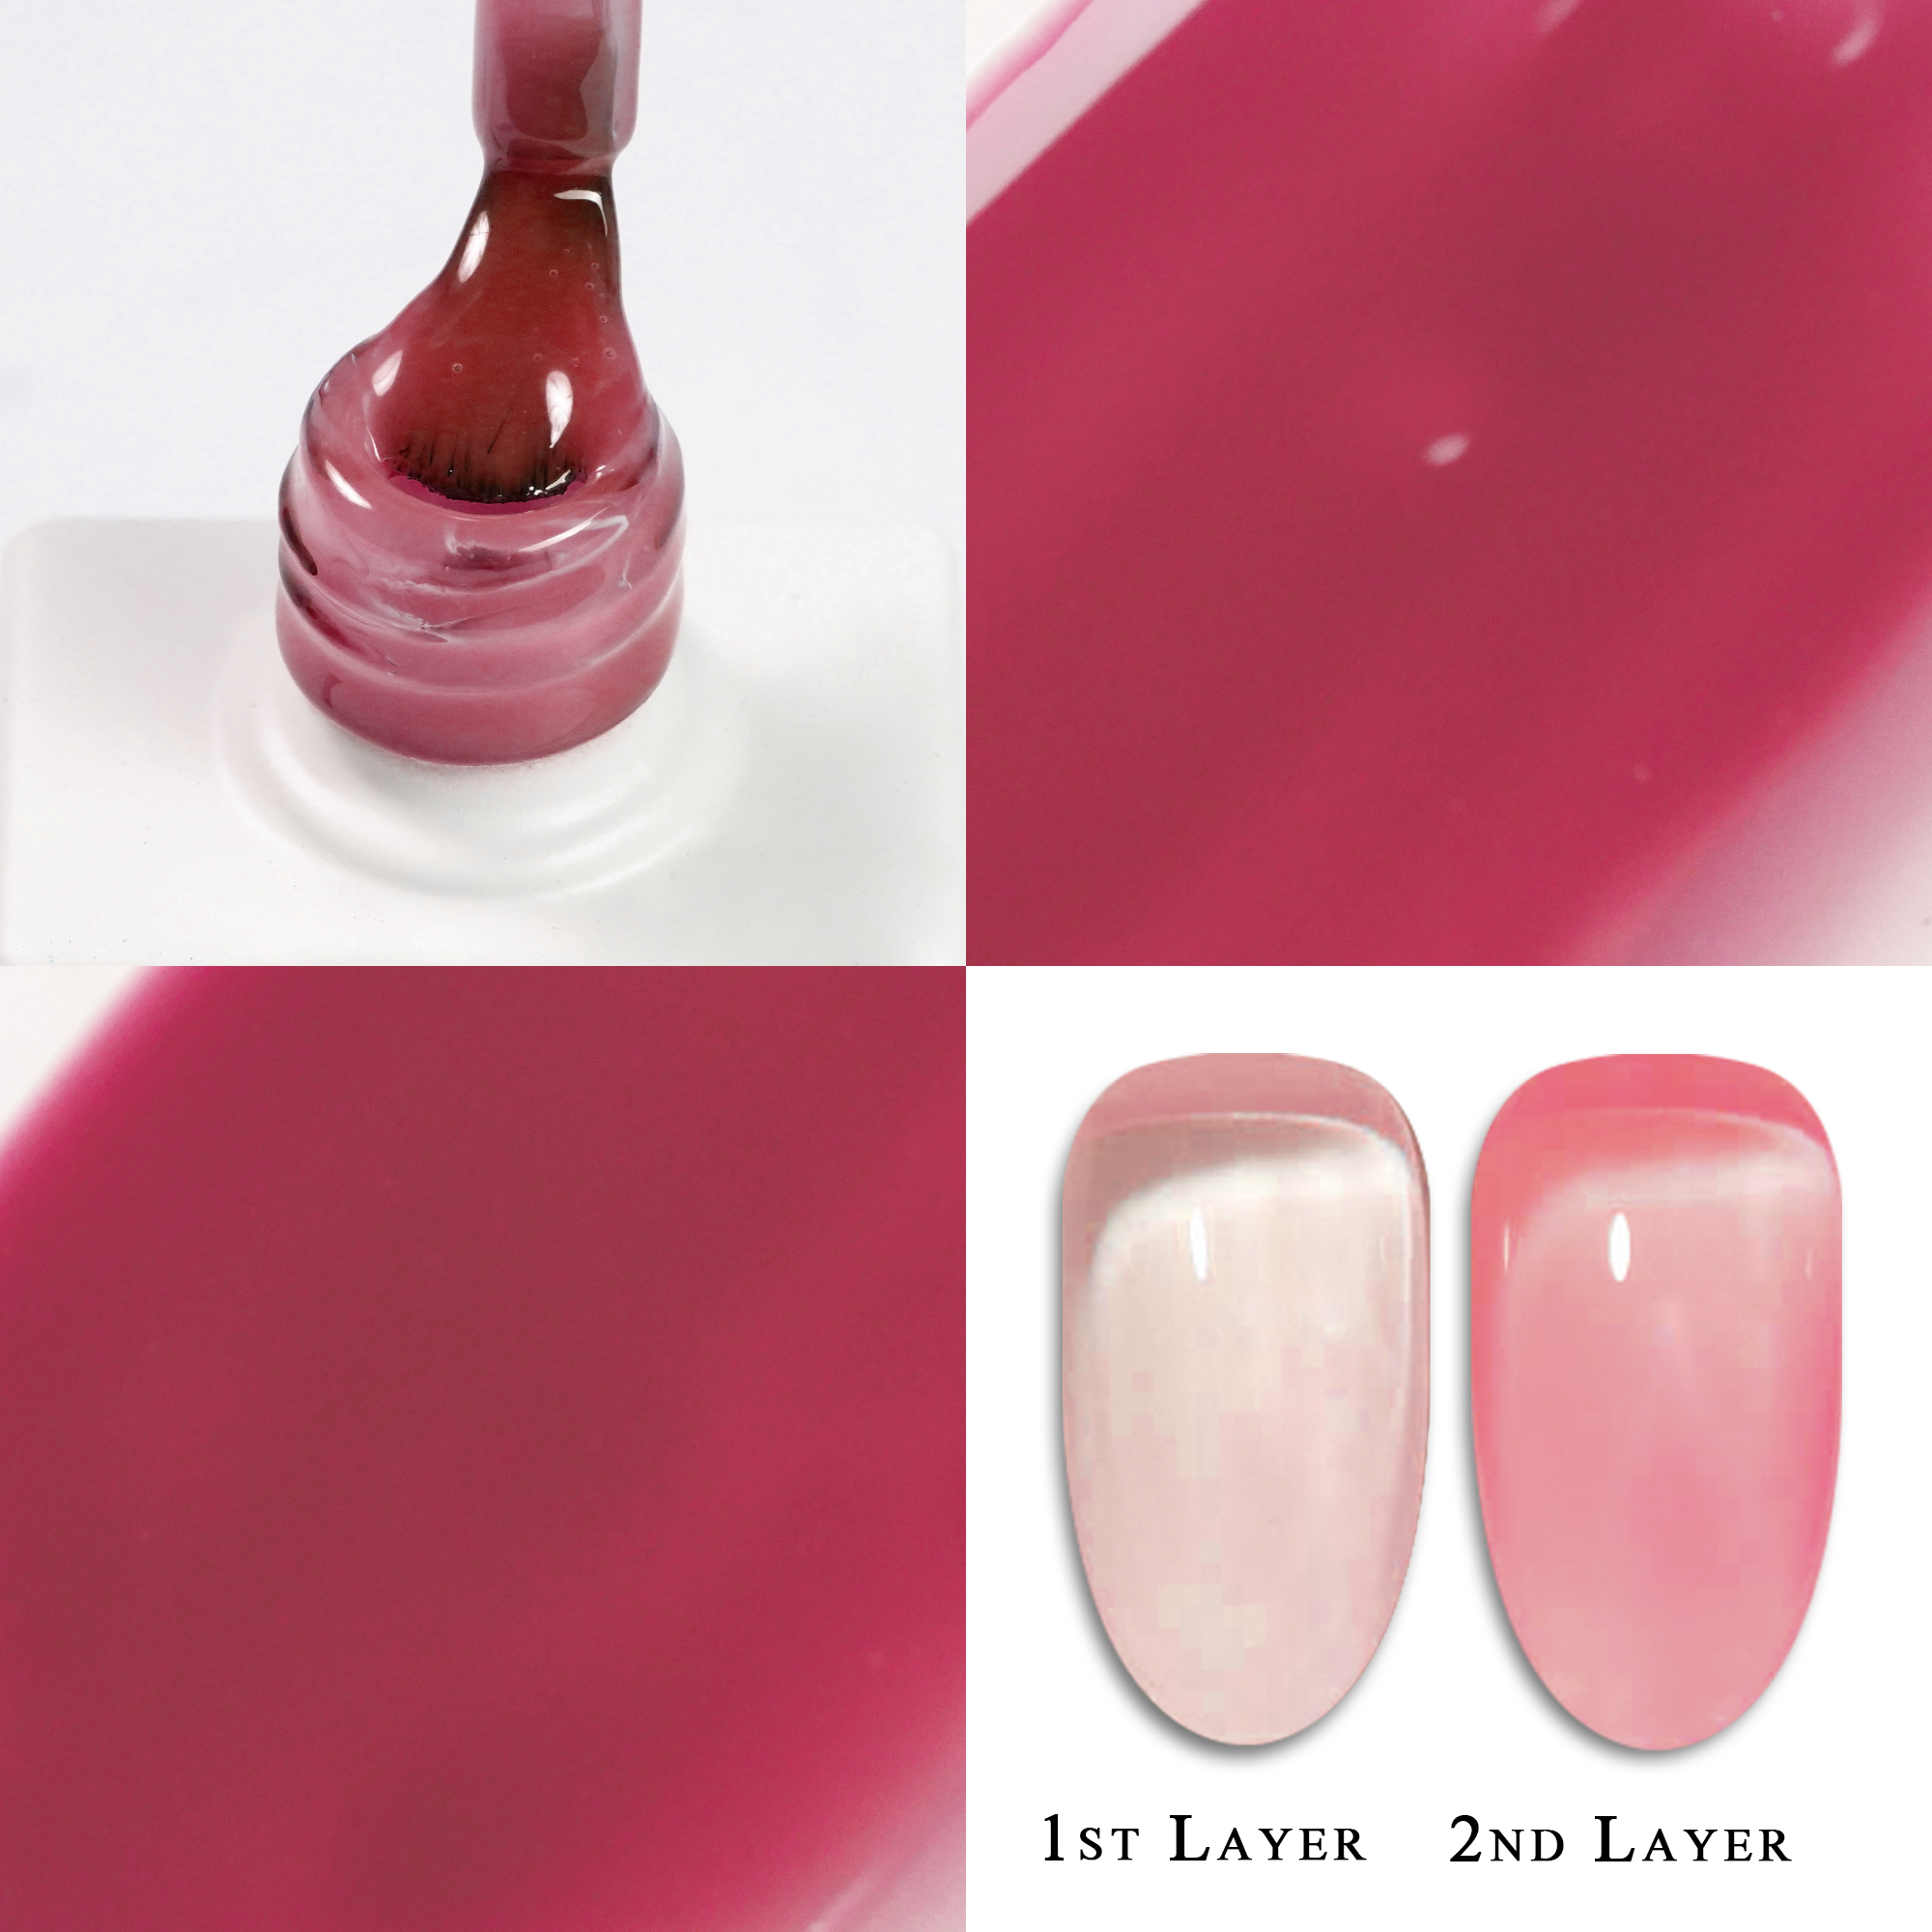 Jelly Gel Polish Colors - Lavis J02-23 - Candy Collection